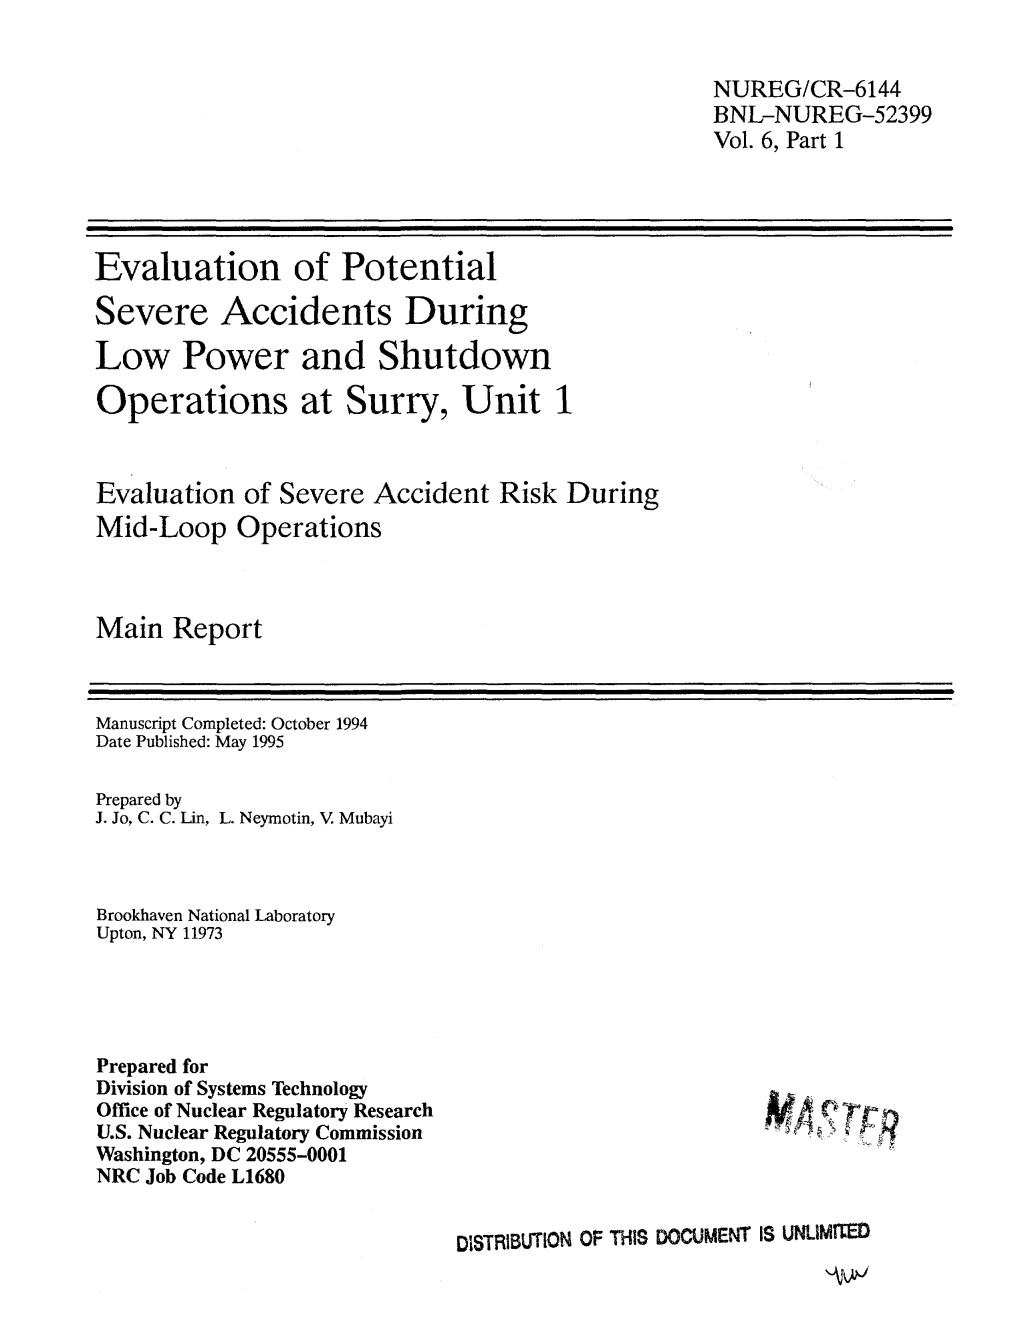 Evaluation of Potential Severe Accidents During Low Power and Shutdown Operations at Surry, Unit 1